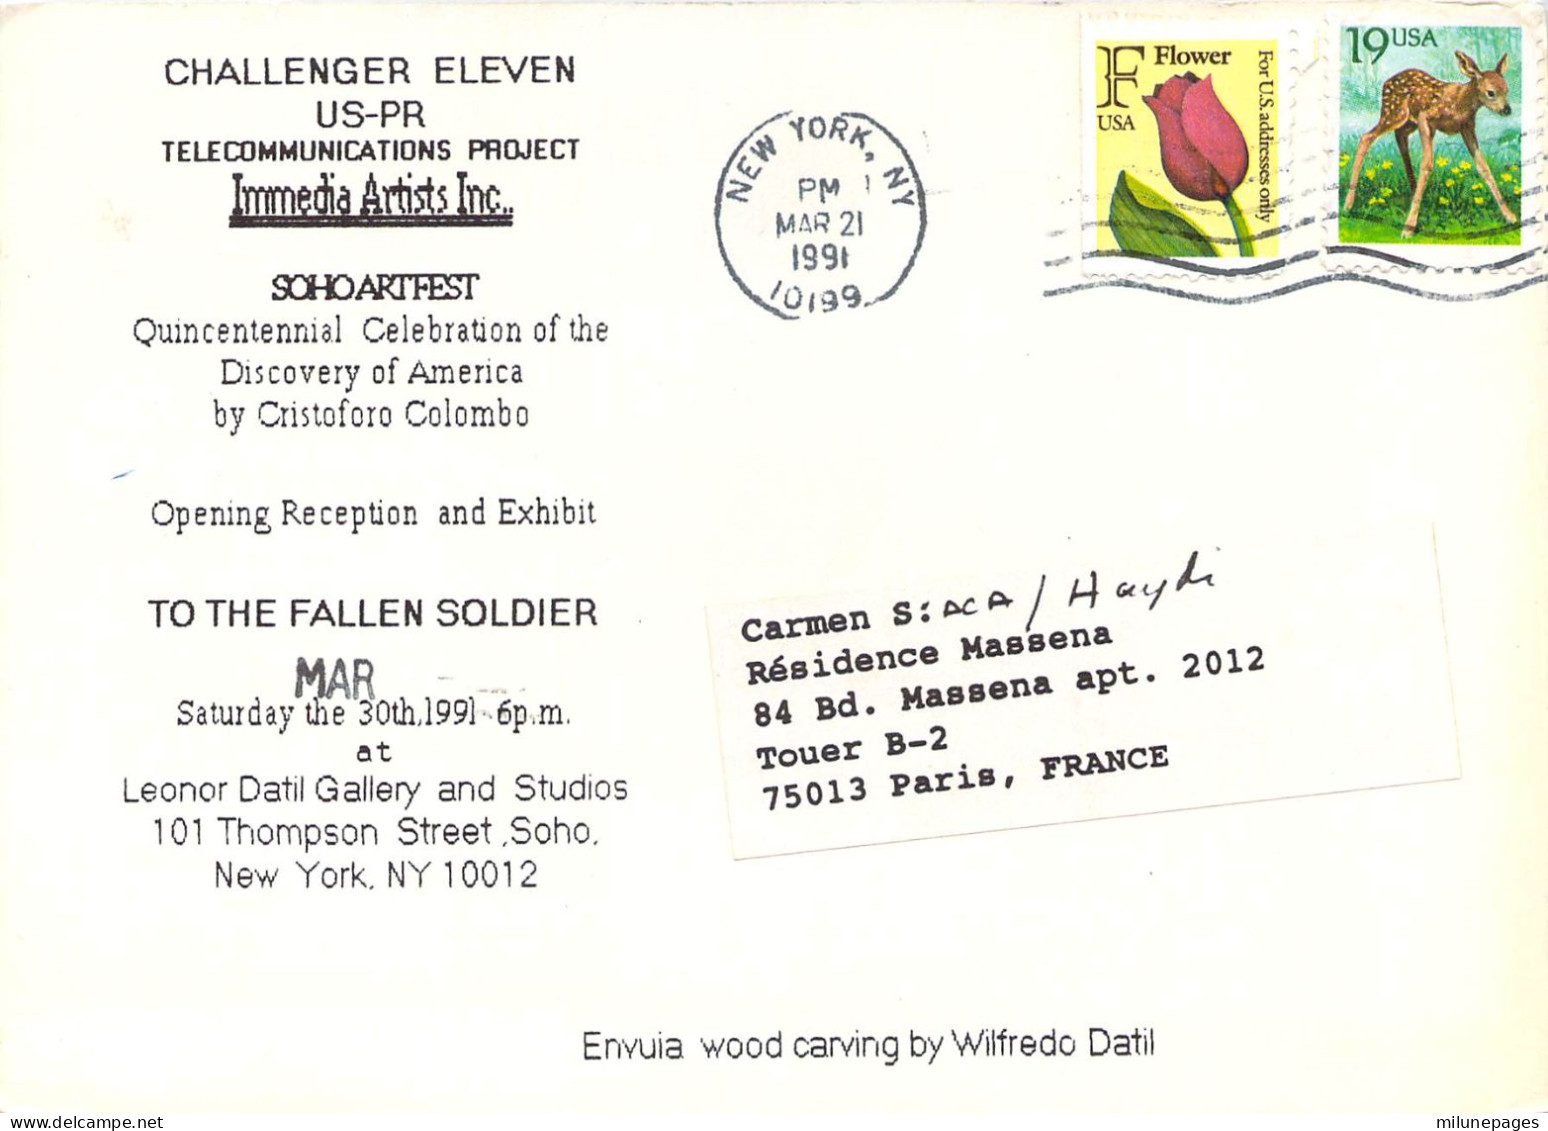 USA NY Challenger Eleven US-PR Immedia Artists Inc. Sohoartfest Mar. 1991 Enyuia Wood Carving By Wilfredo Datil - Exposiciones